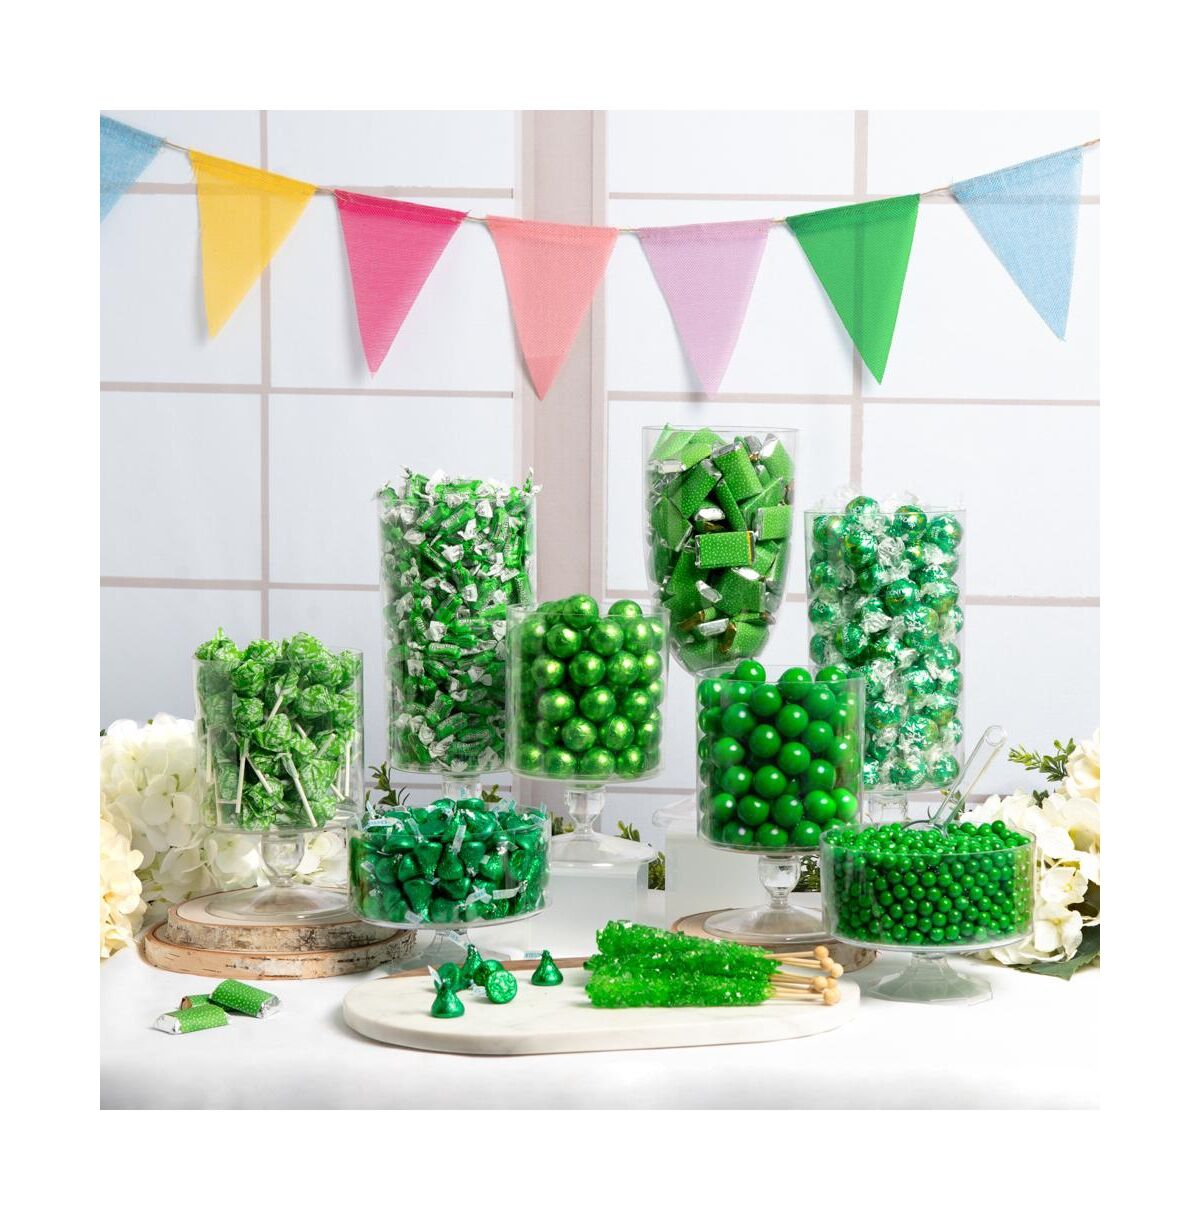 Candy 14lbs+ Deluxe Green Candy Buffet - Green